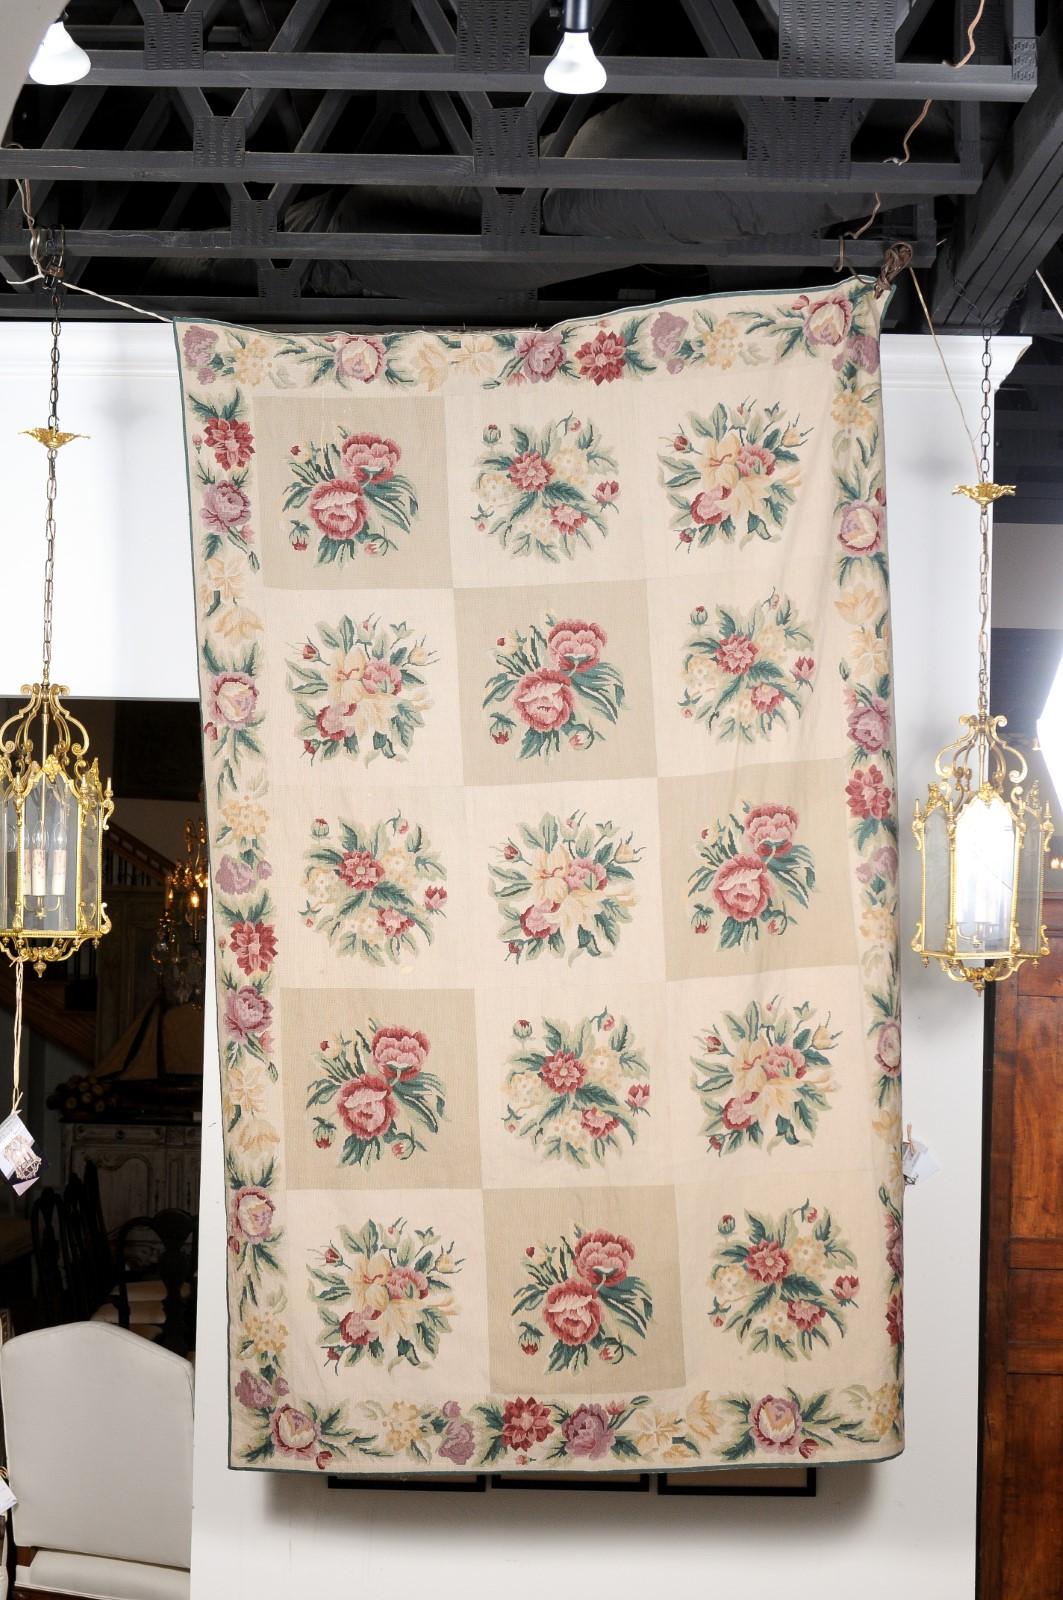 A French Aubusson wall tapestry from the 19th century, with pink and cream floral décor. Created during the 19th century in the Aubusson manufacture located in central France, this wall tapestry features a perfectly organized décor showcasing